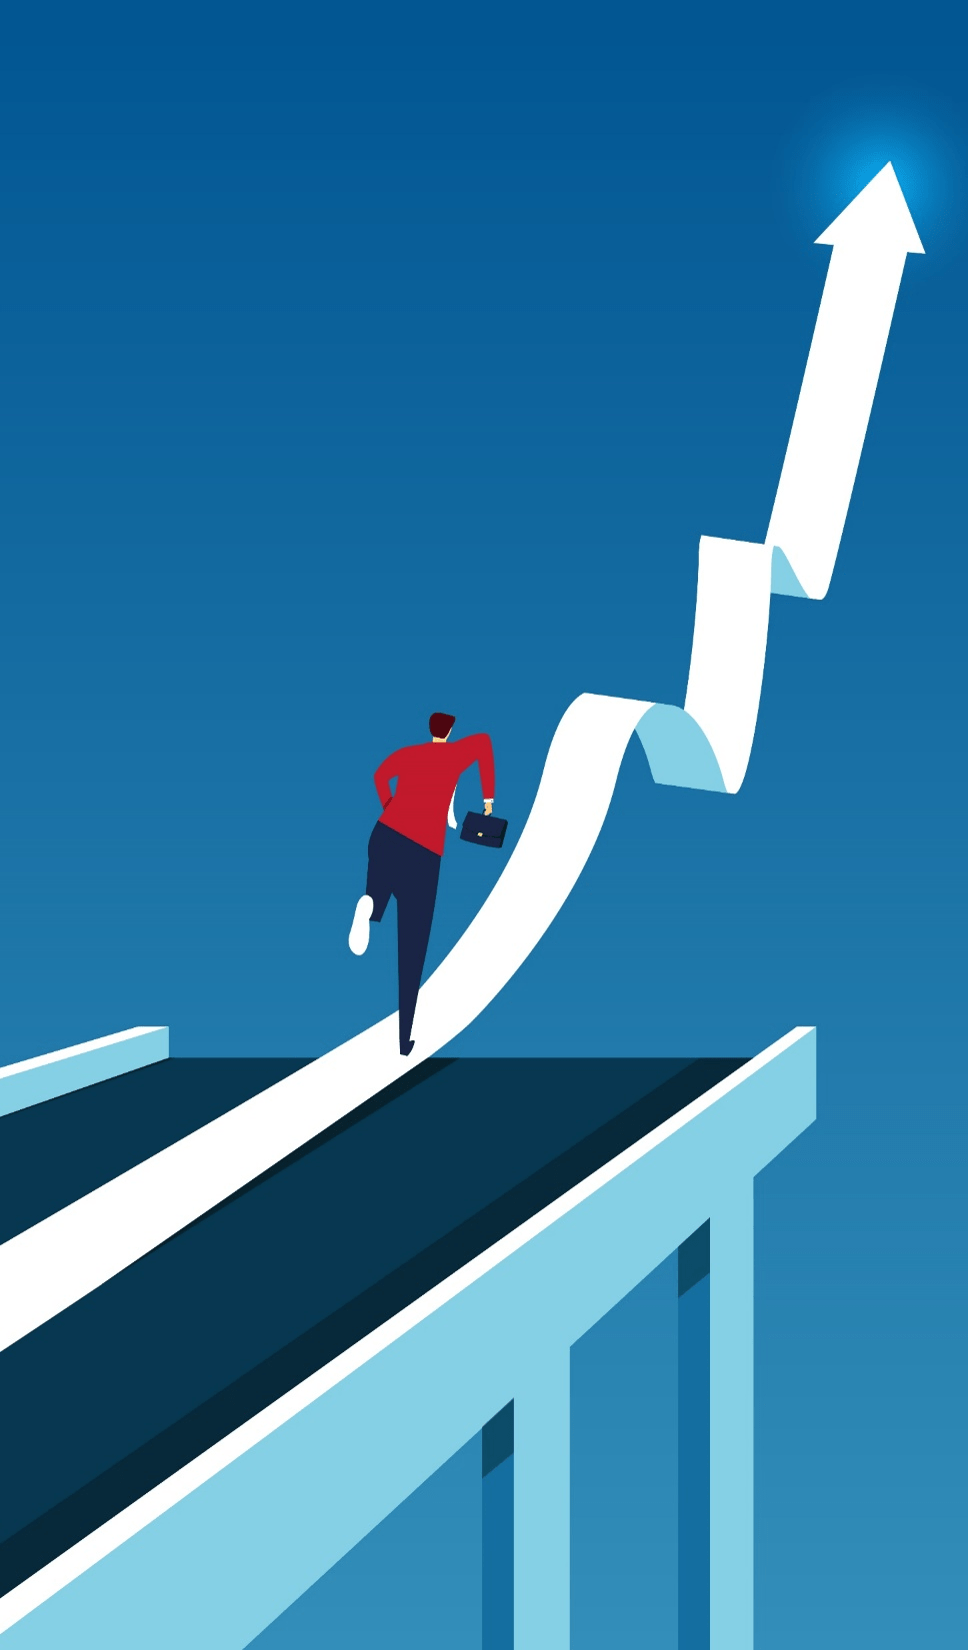 Stock image of a person running up a line with a positive trend.